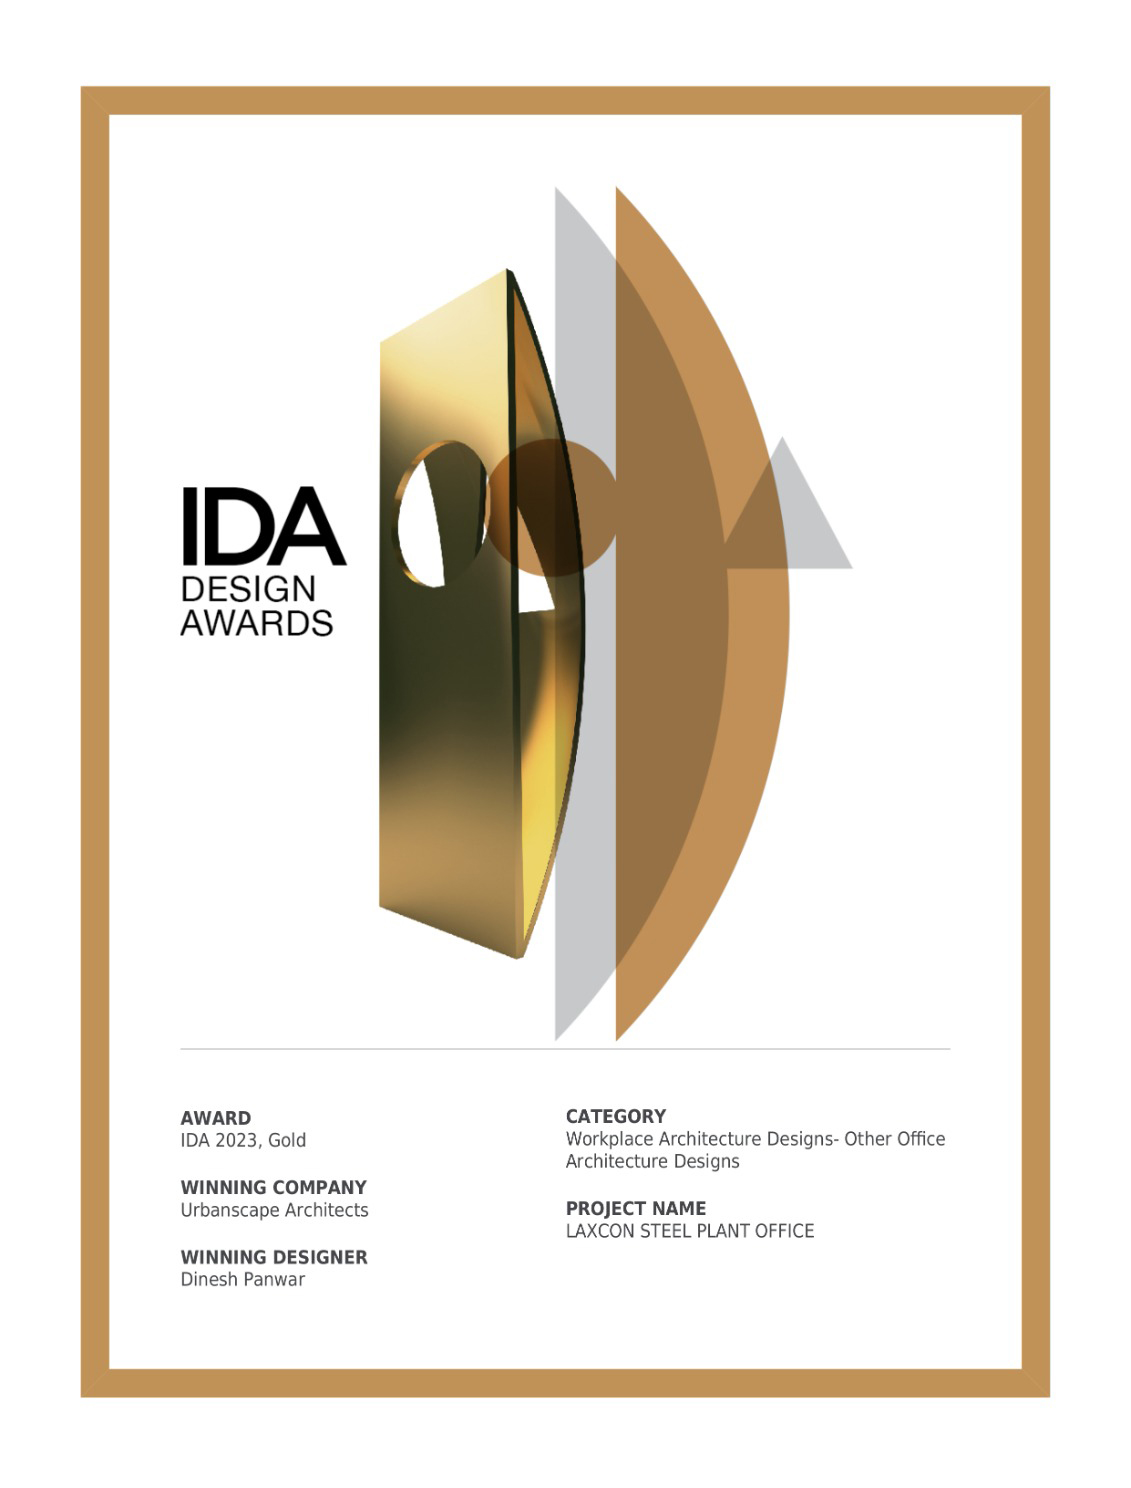 Laxcon Steel Plant Office at Ahmedabad is a gold winner at IDA design awards.